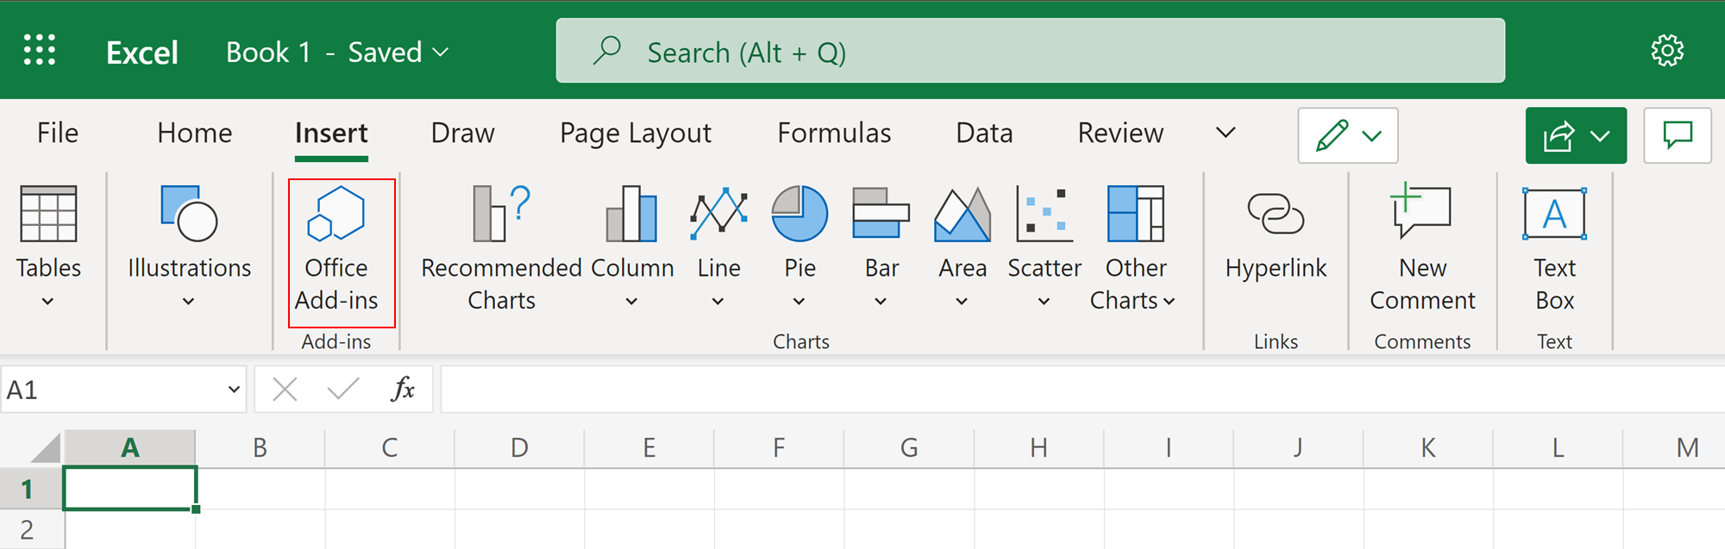 Excel for web workbook with office add-ins button highlighted by red rectangle